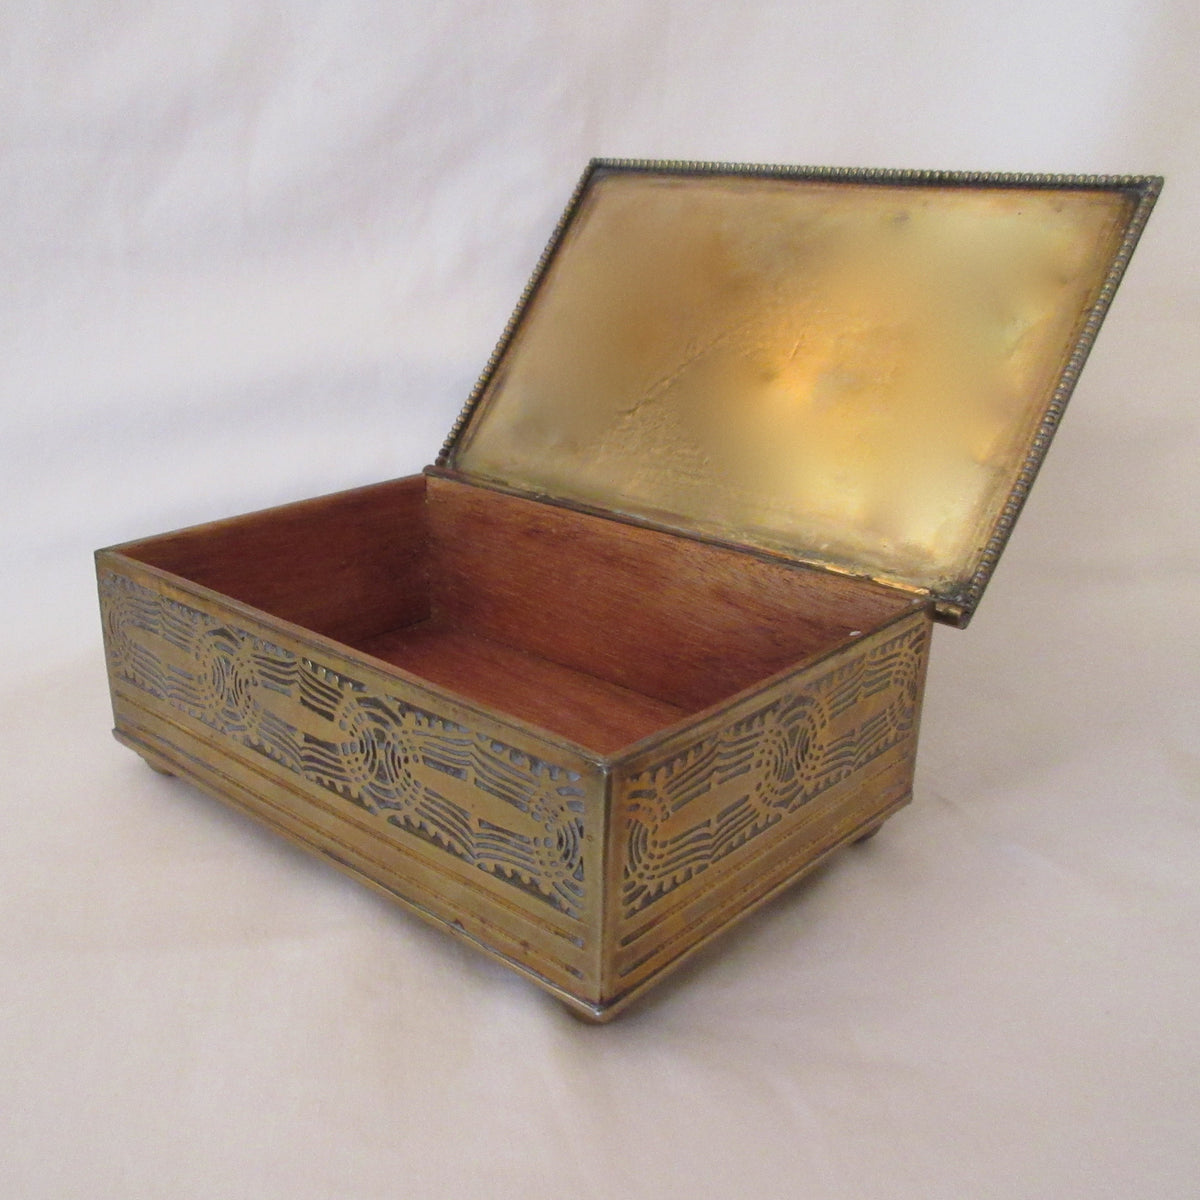 Brass Box Arts and Crafts Antique New Munich – my frugal father